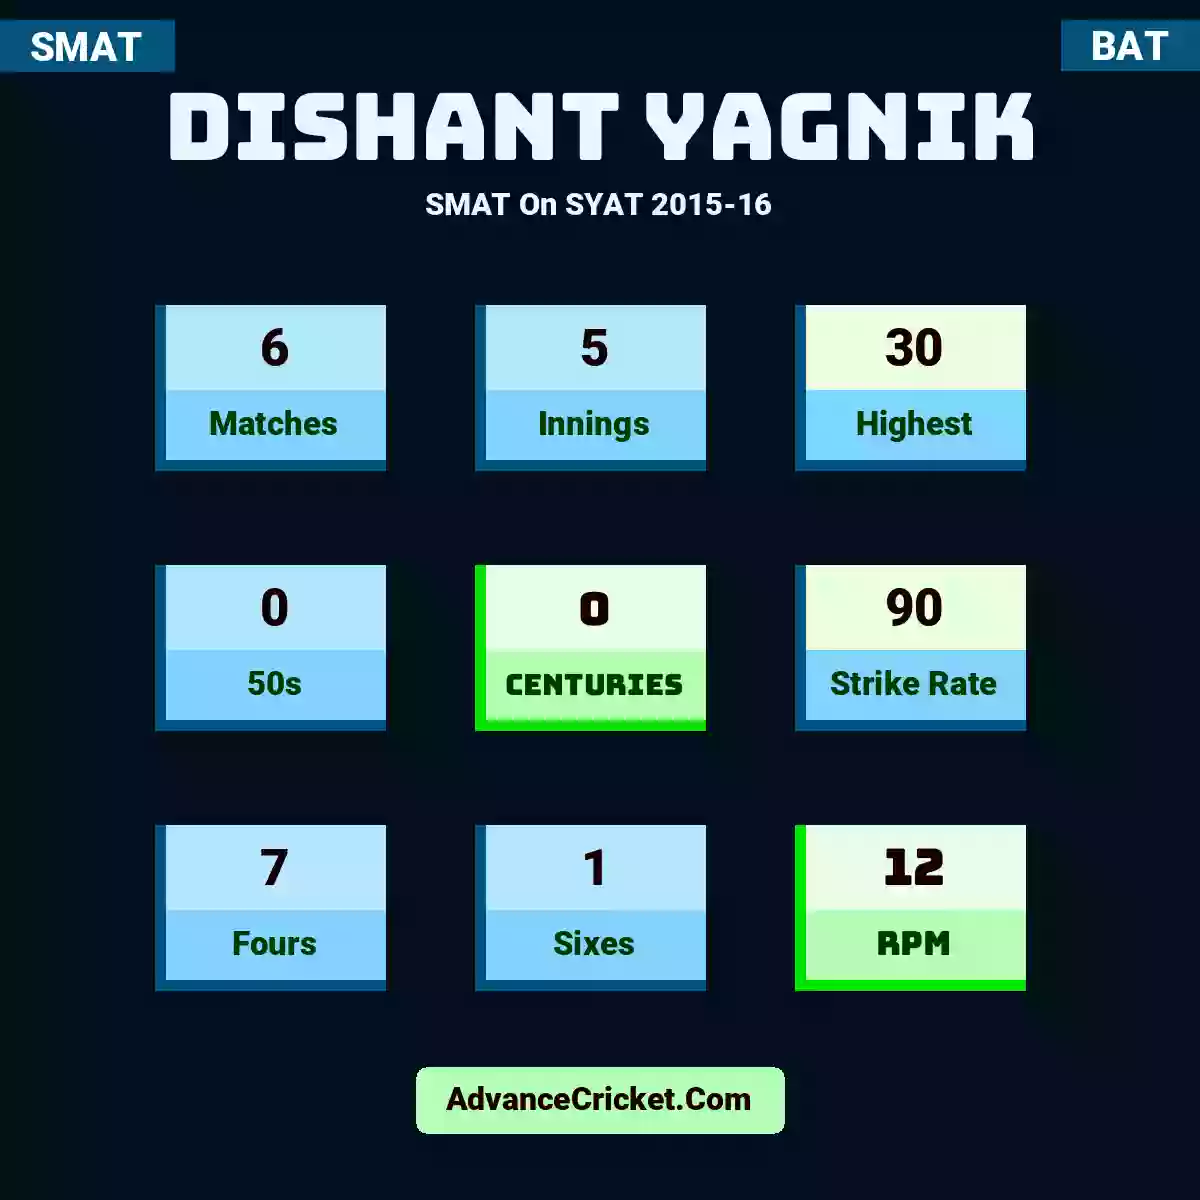 Dishant Yagnik SMAT  On SYAT 2015-16, Dishant Yagnik played 6 matches, scored 30 runs as highest, 0 half-centuries, and 0 centuries, with a strike rate of 90. D.Yagnik hit 7 fours and 1 sixes, with an RPM of 12.